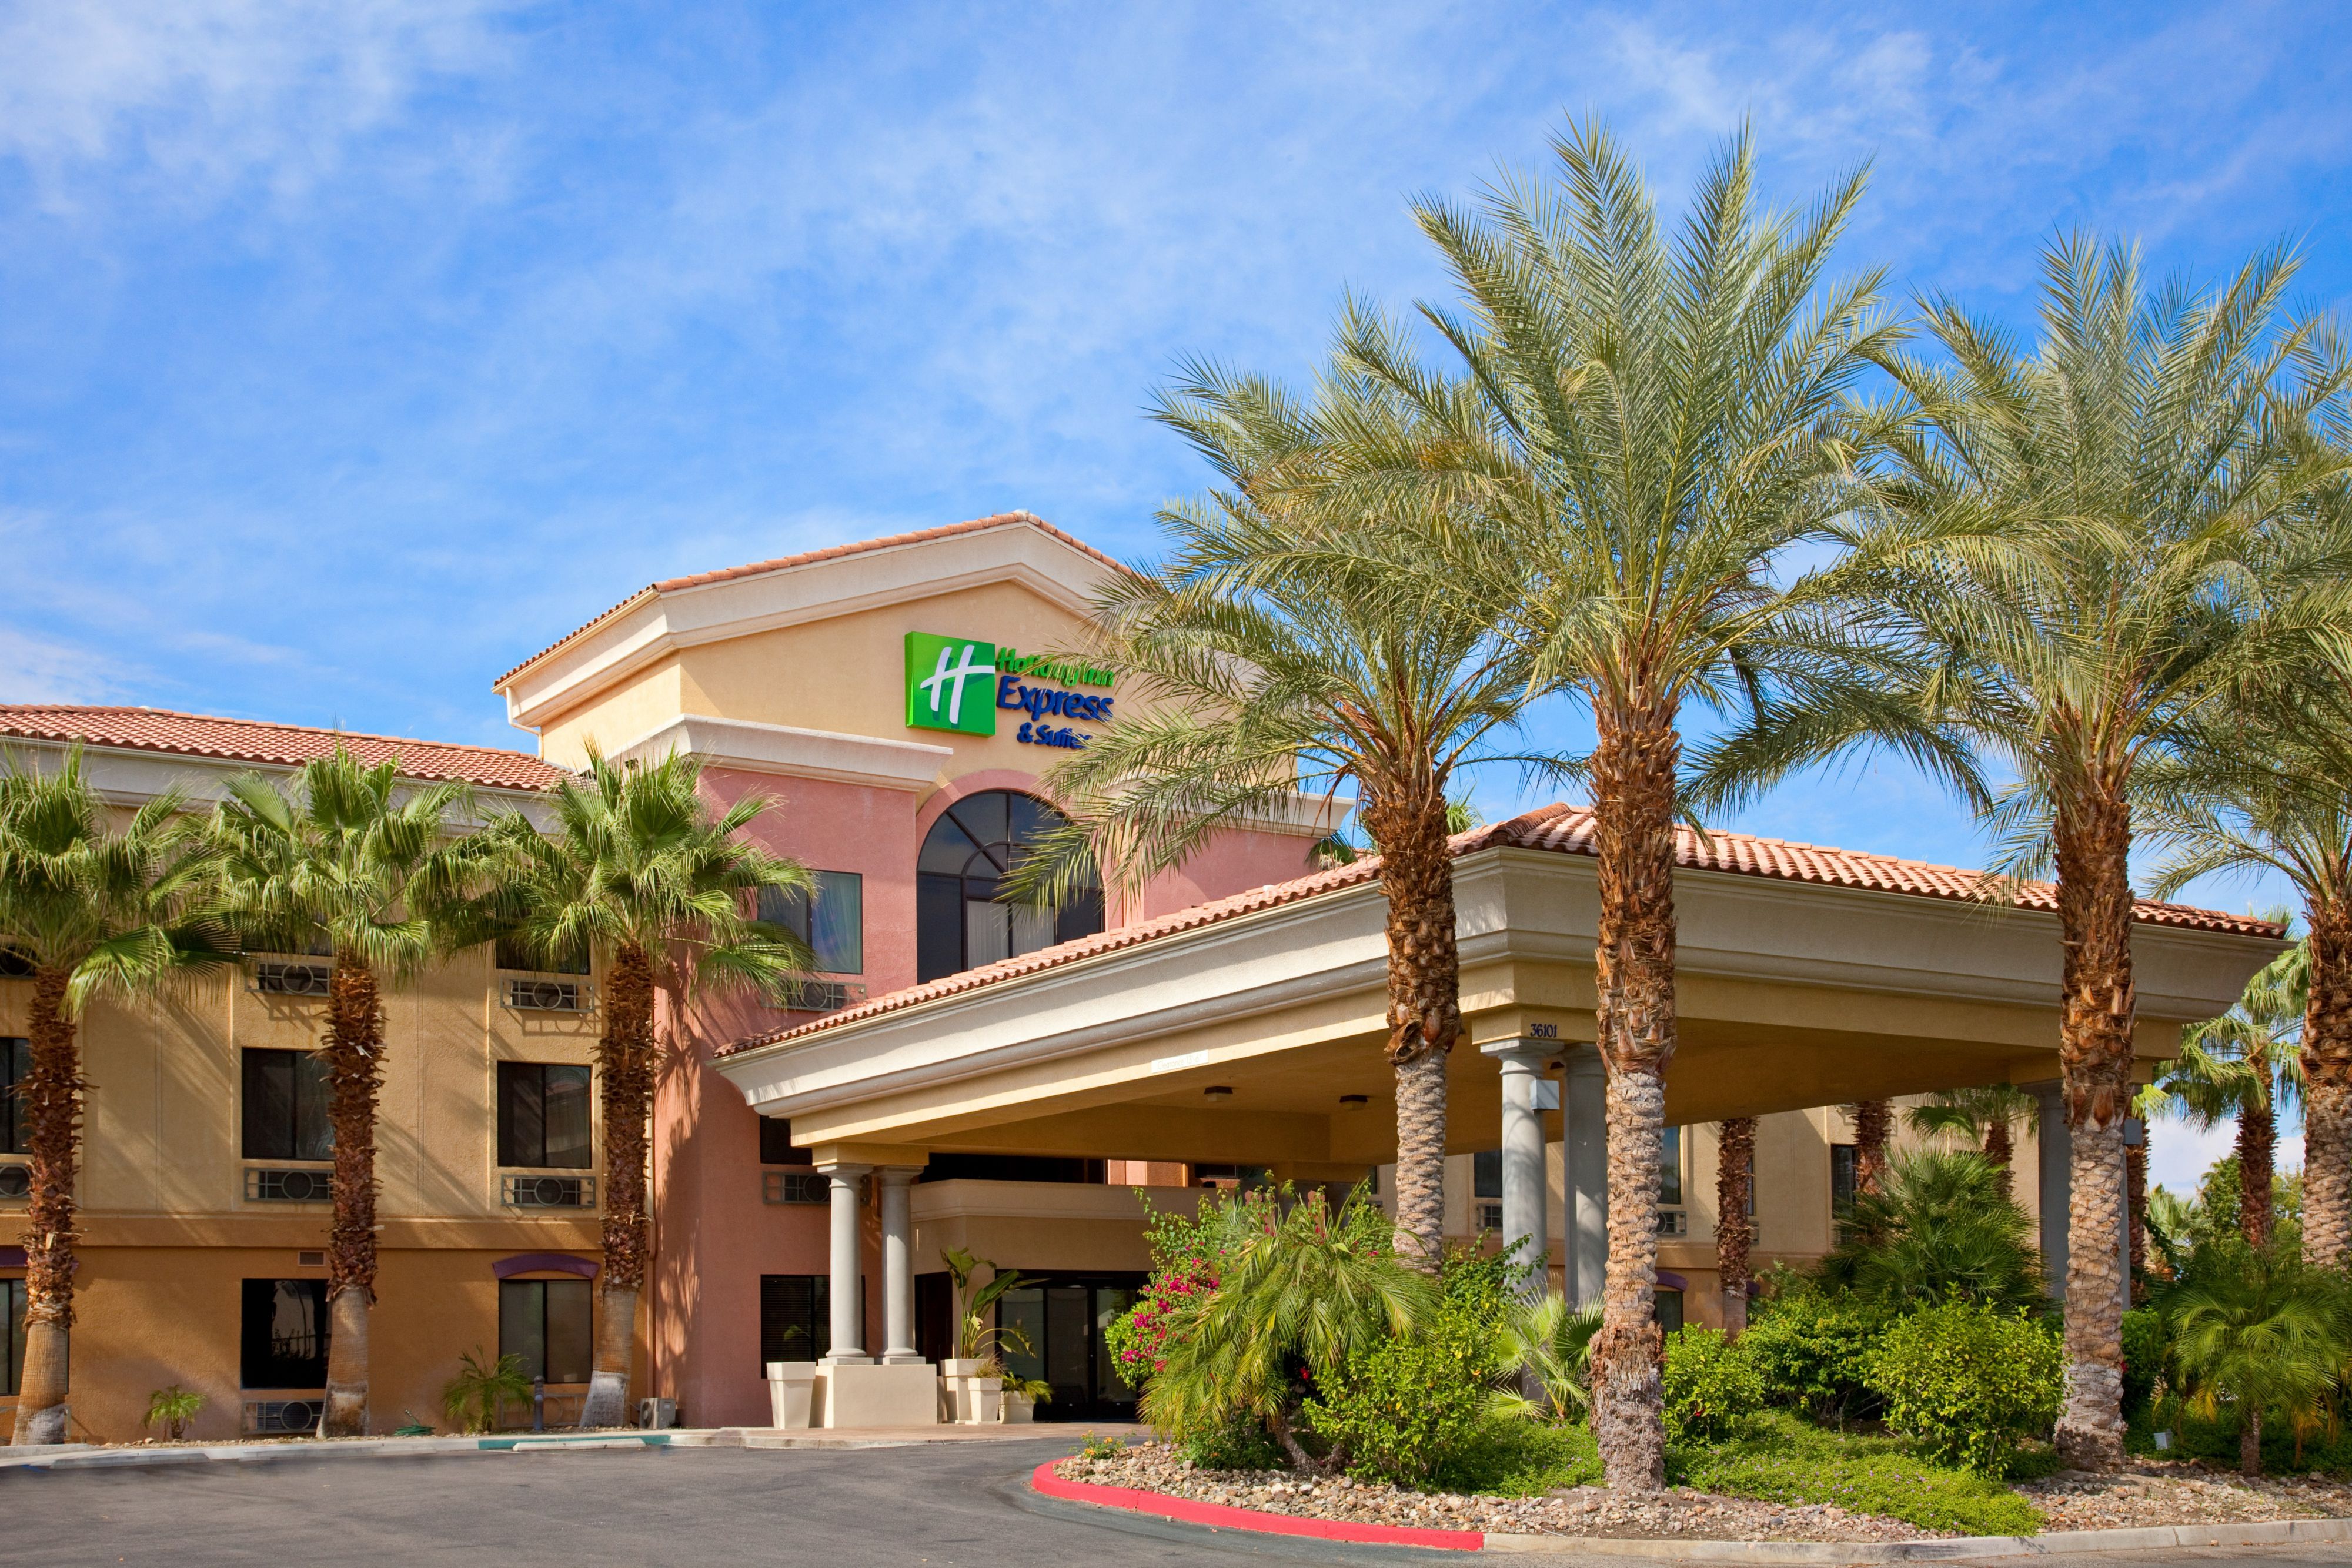 Cathedral City Hotel - Holiday Inn Express Cathedral City (Palm Springs)  Hotel